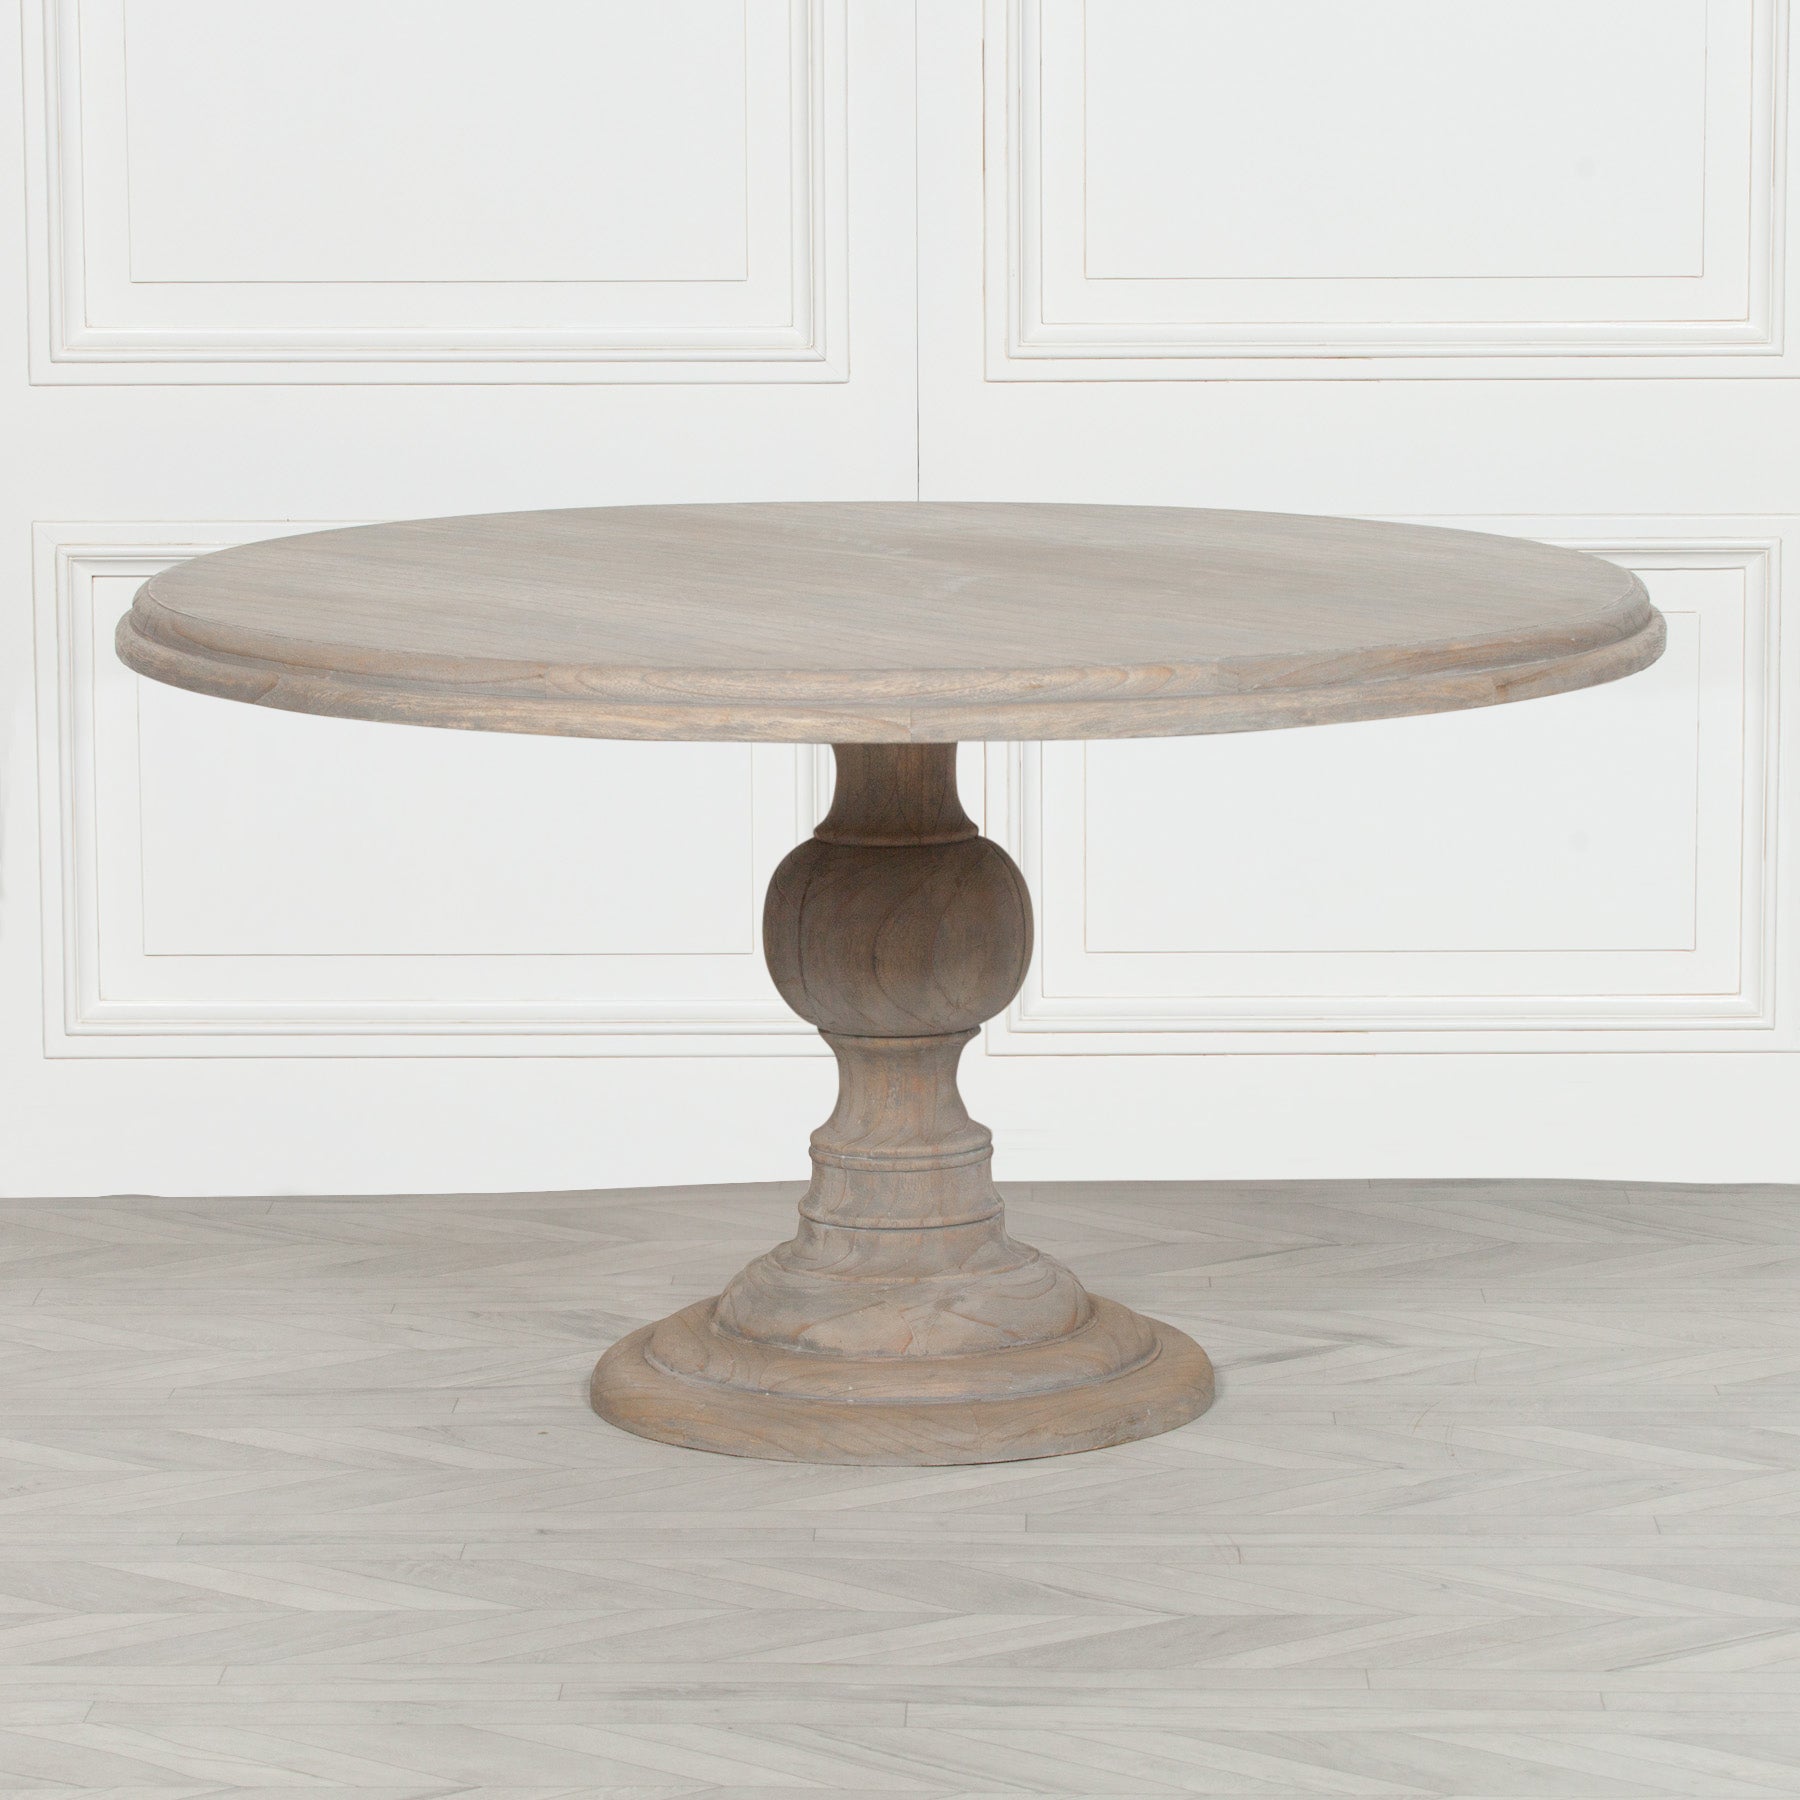 Rustic Wooden Round Dining Table 120cm